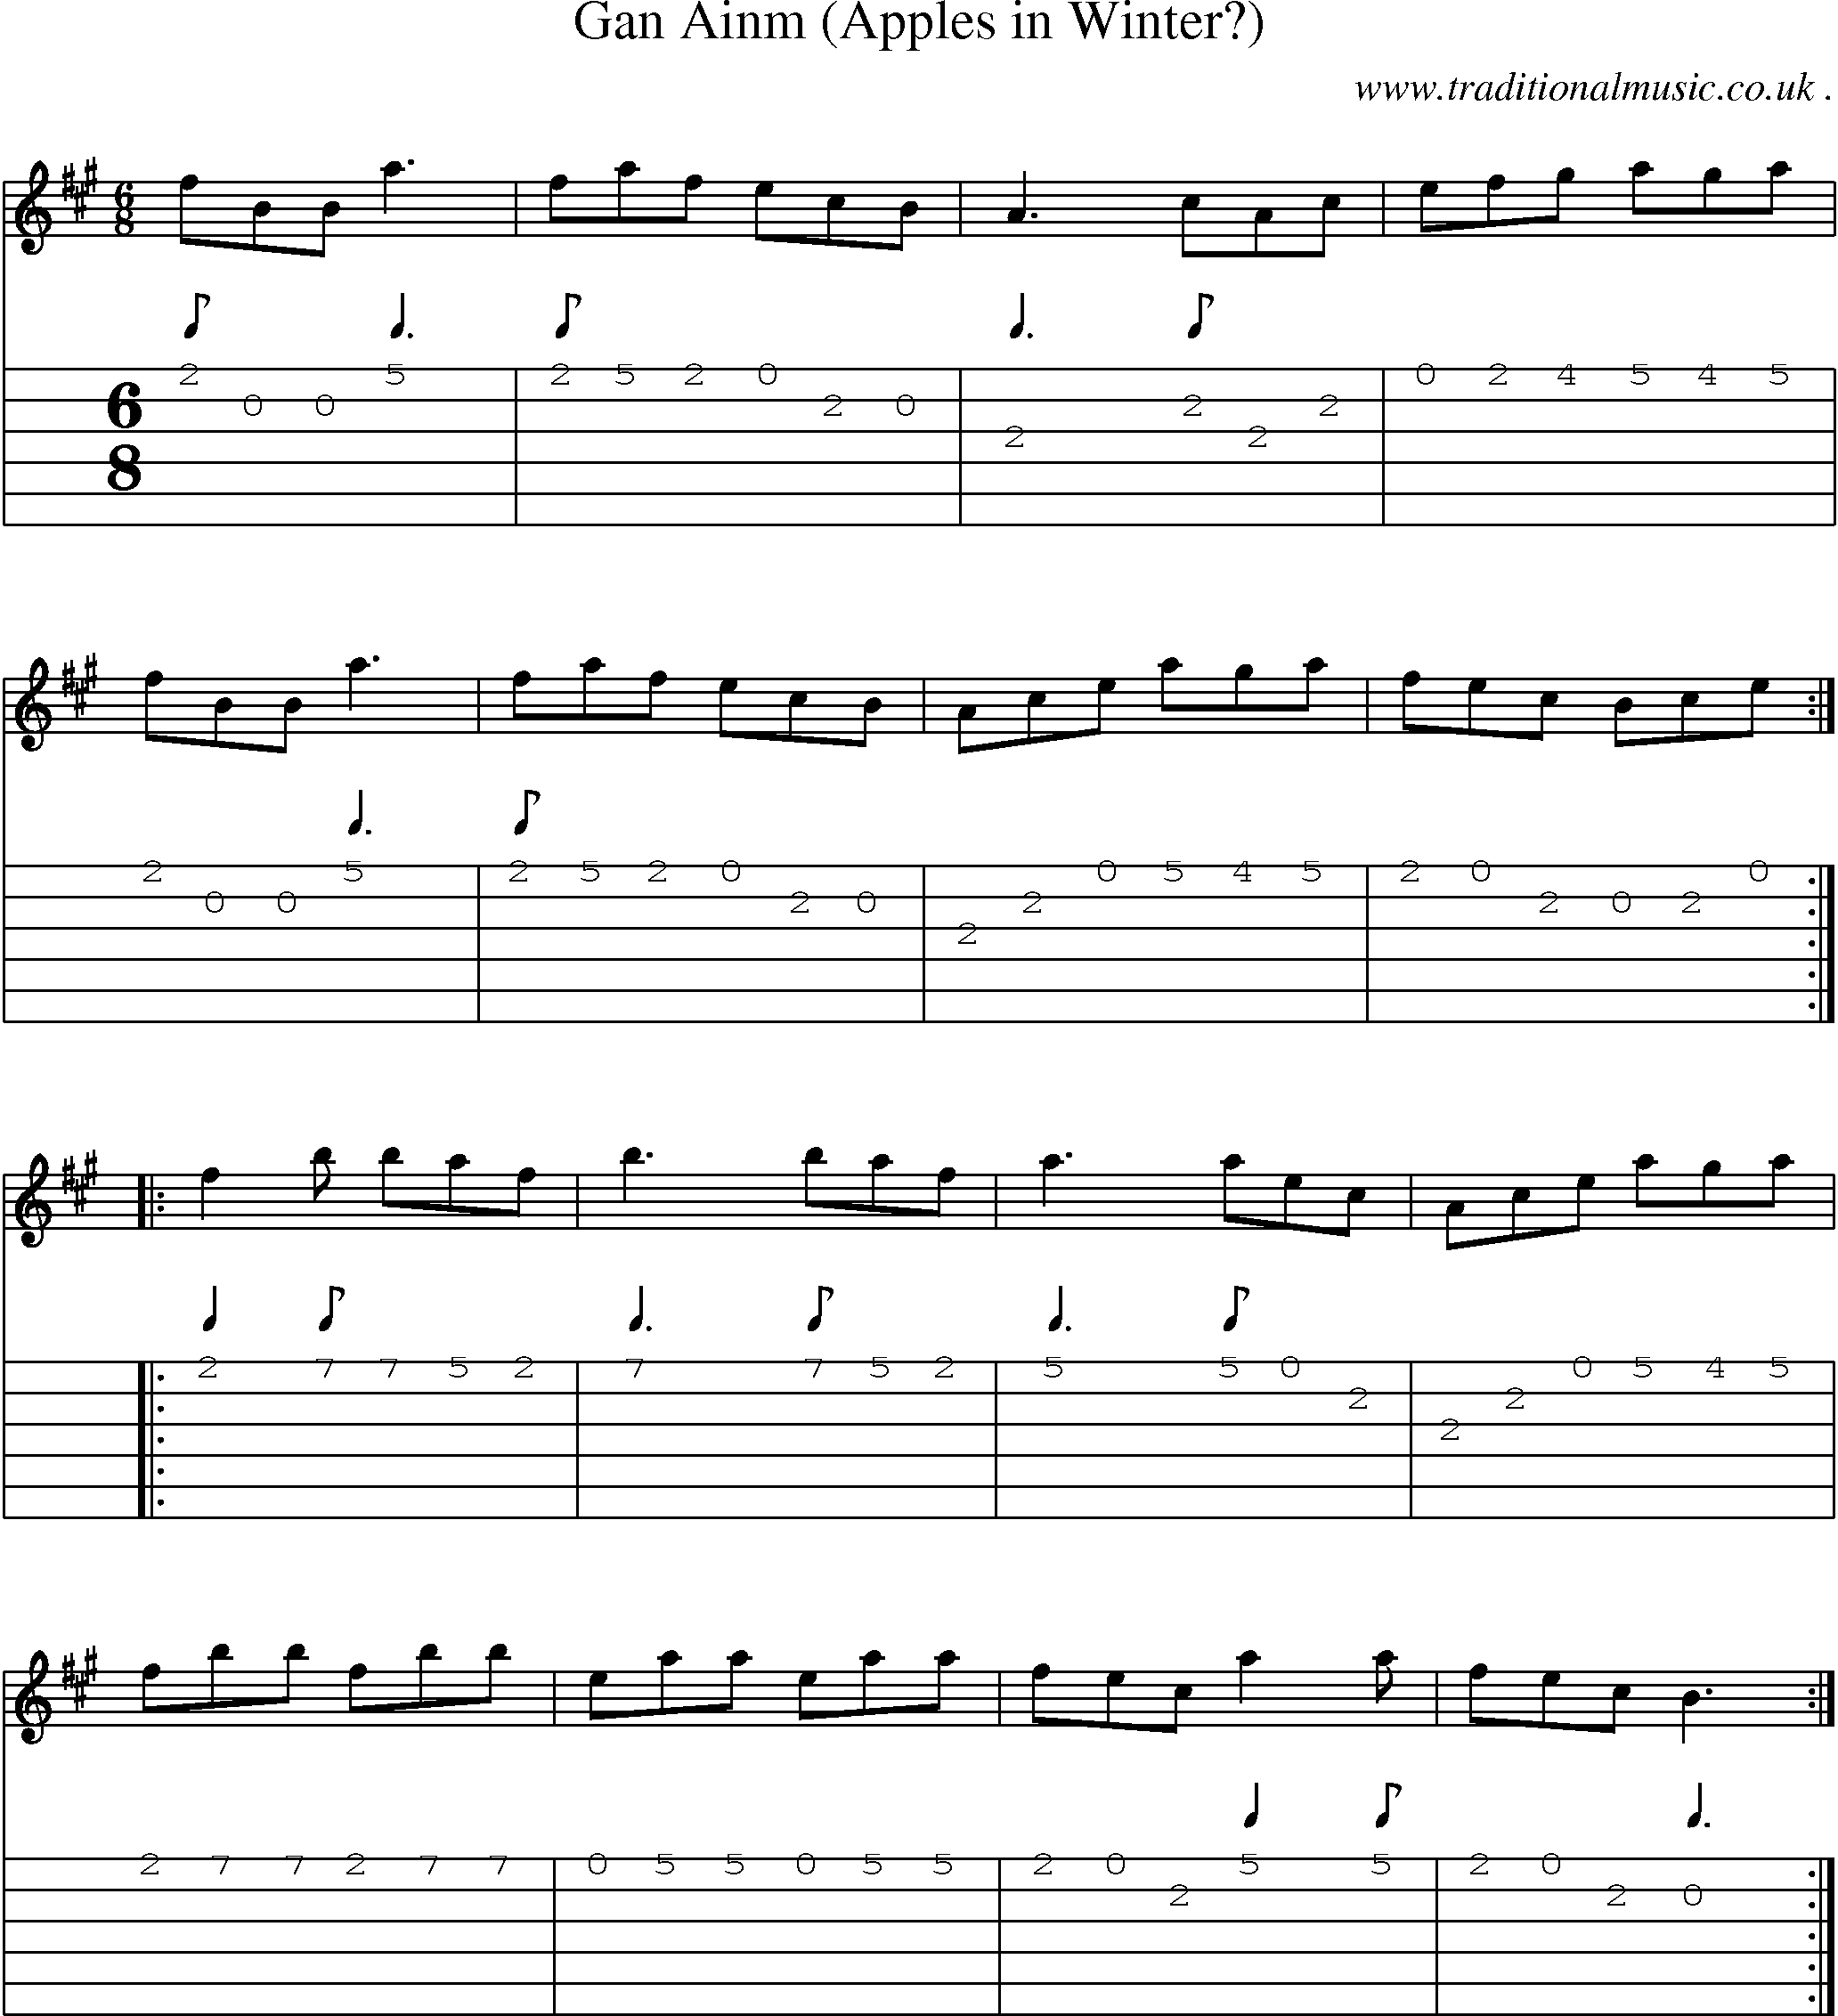 Sheet-Music and Guitar Tabs for Gan Ainm (apples In Winter)